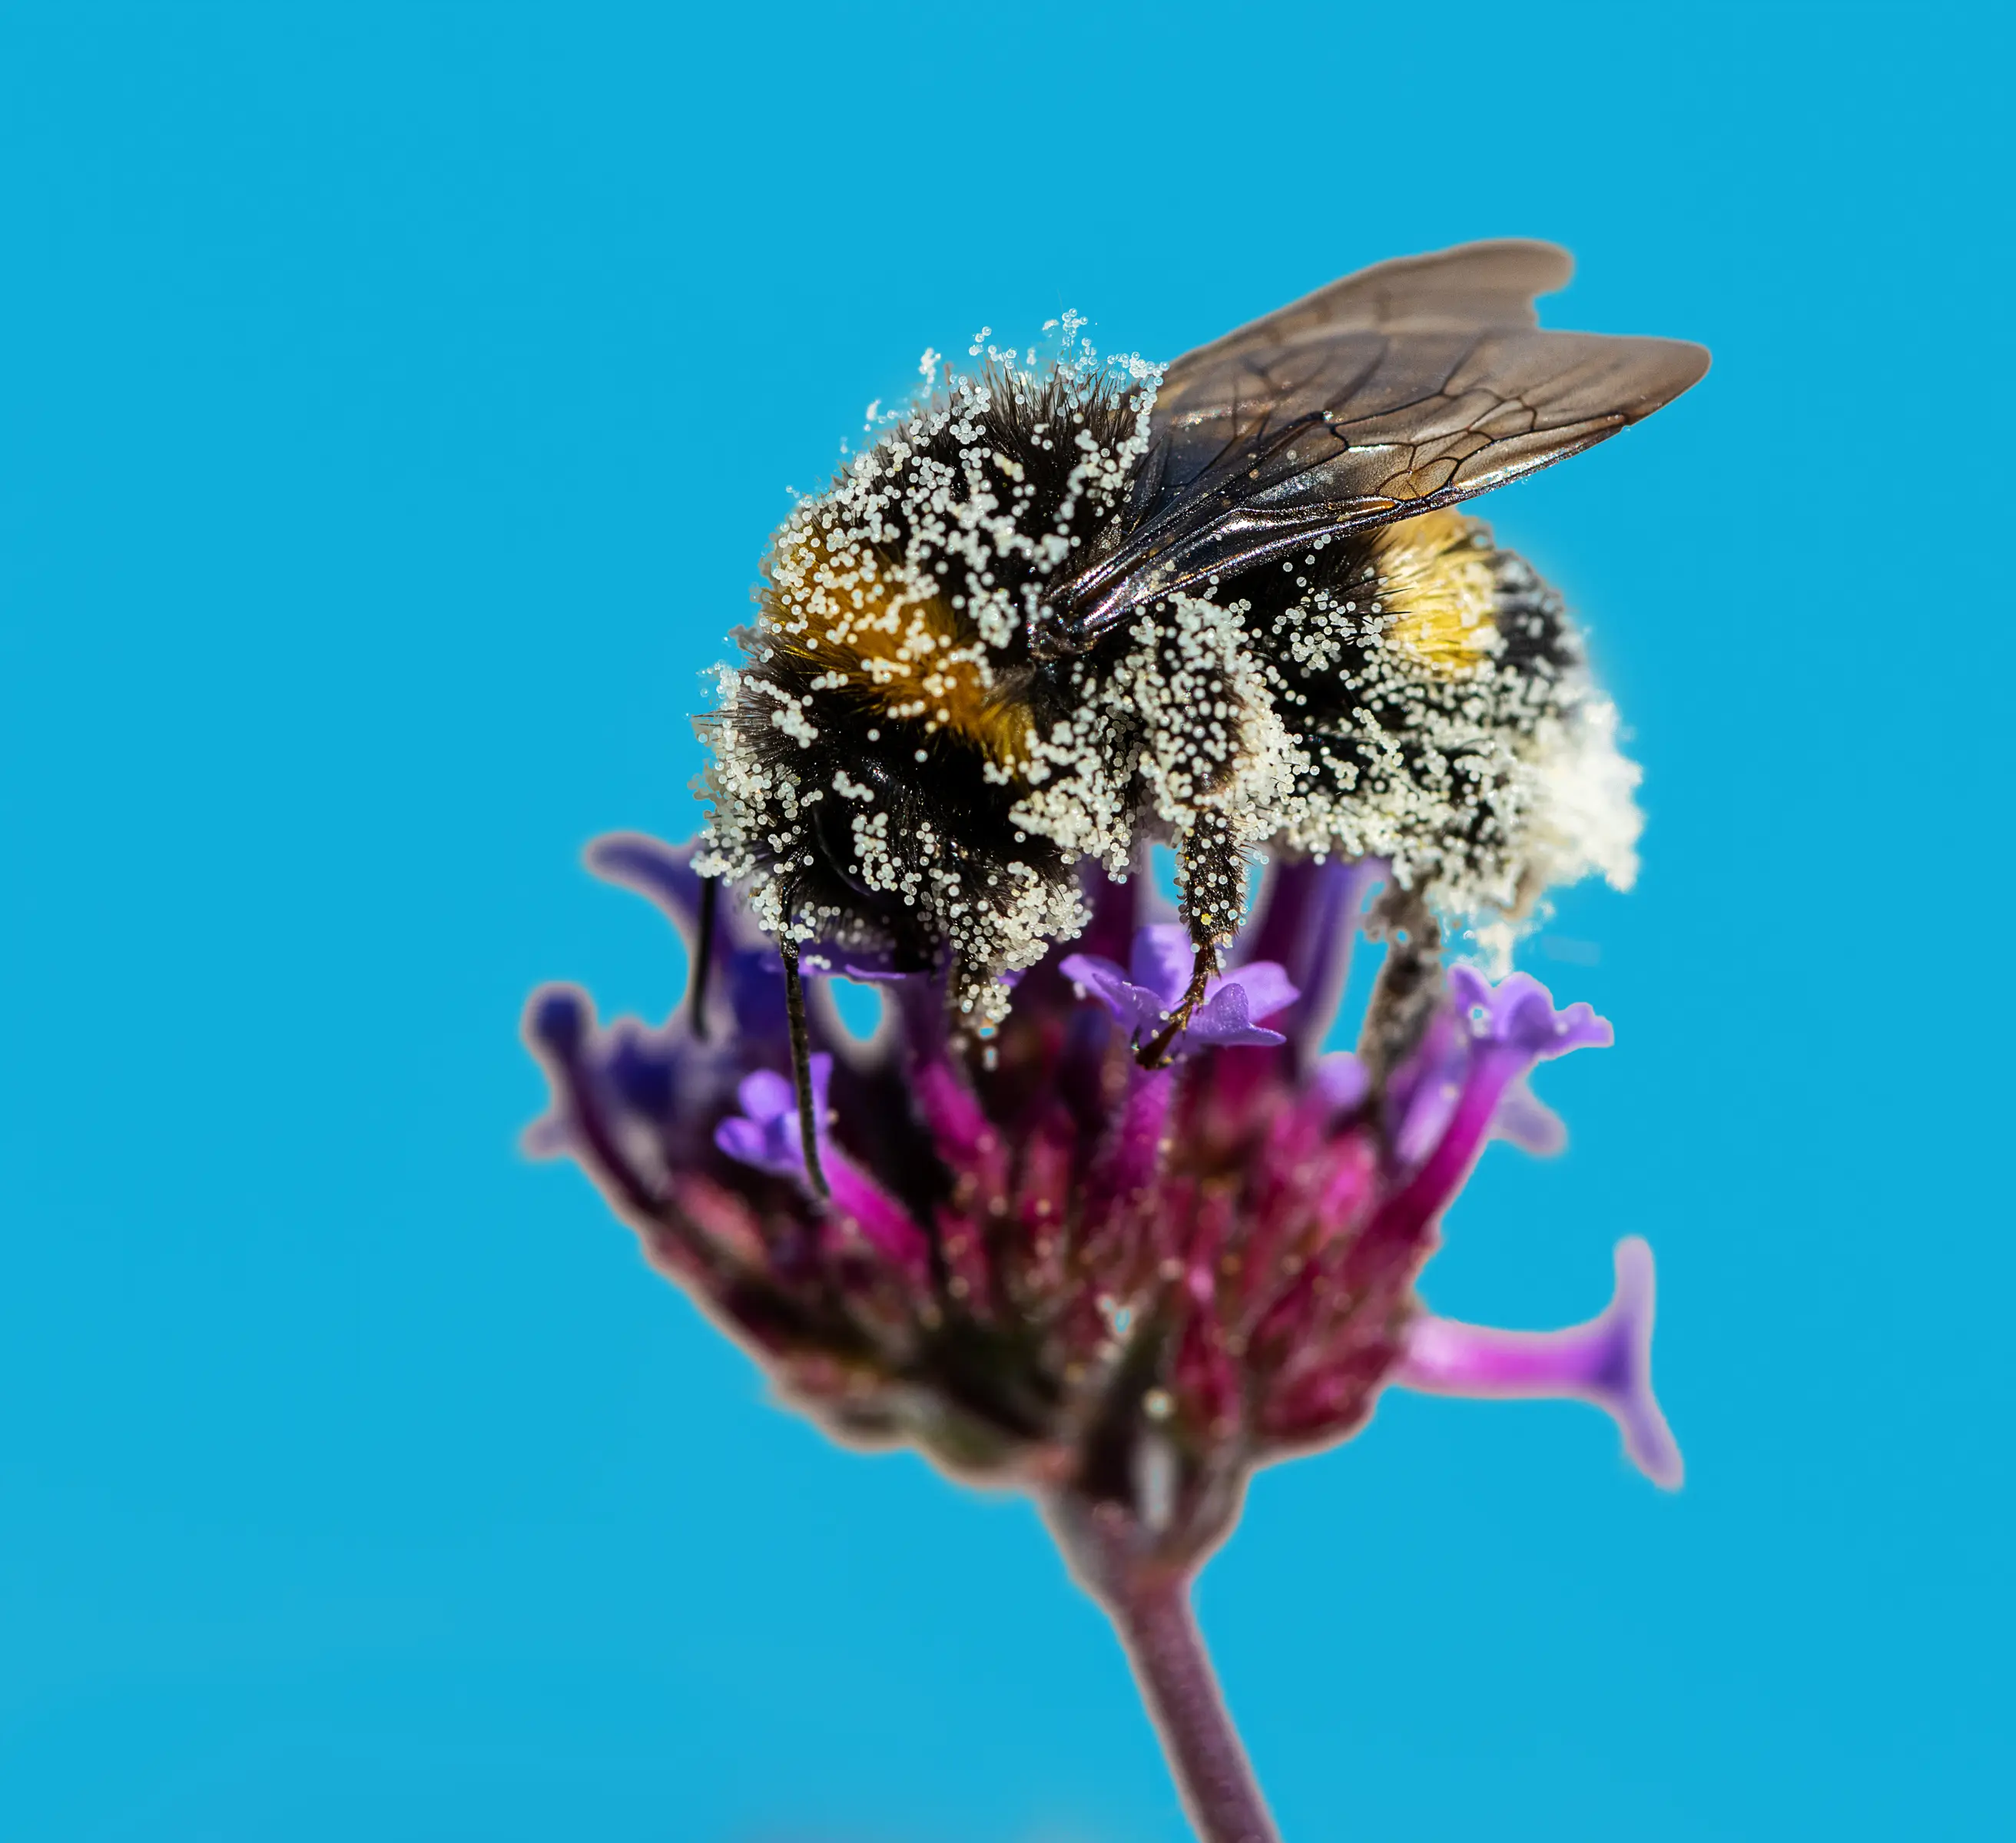 A bumblebee covered in pollen on a purple flower against a bright blue background 